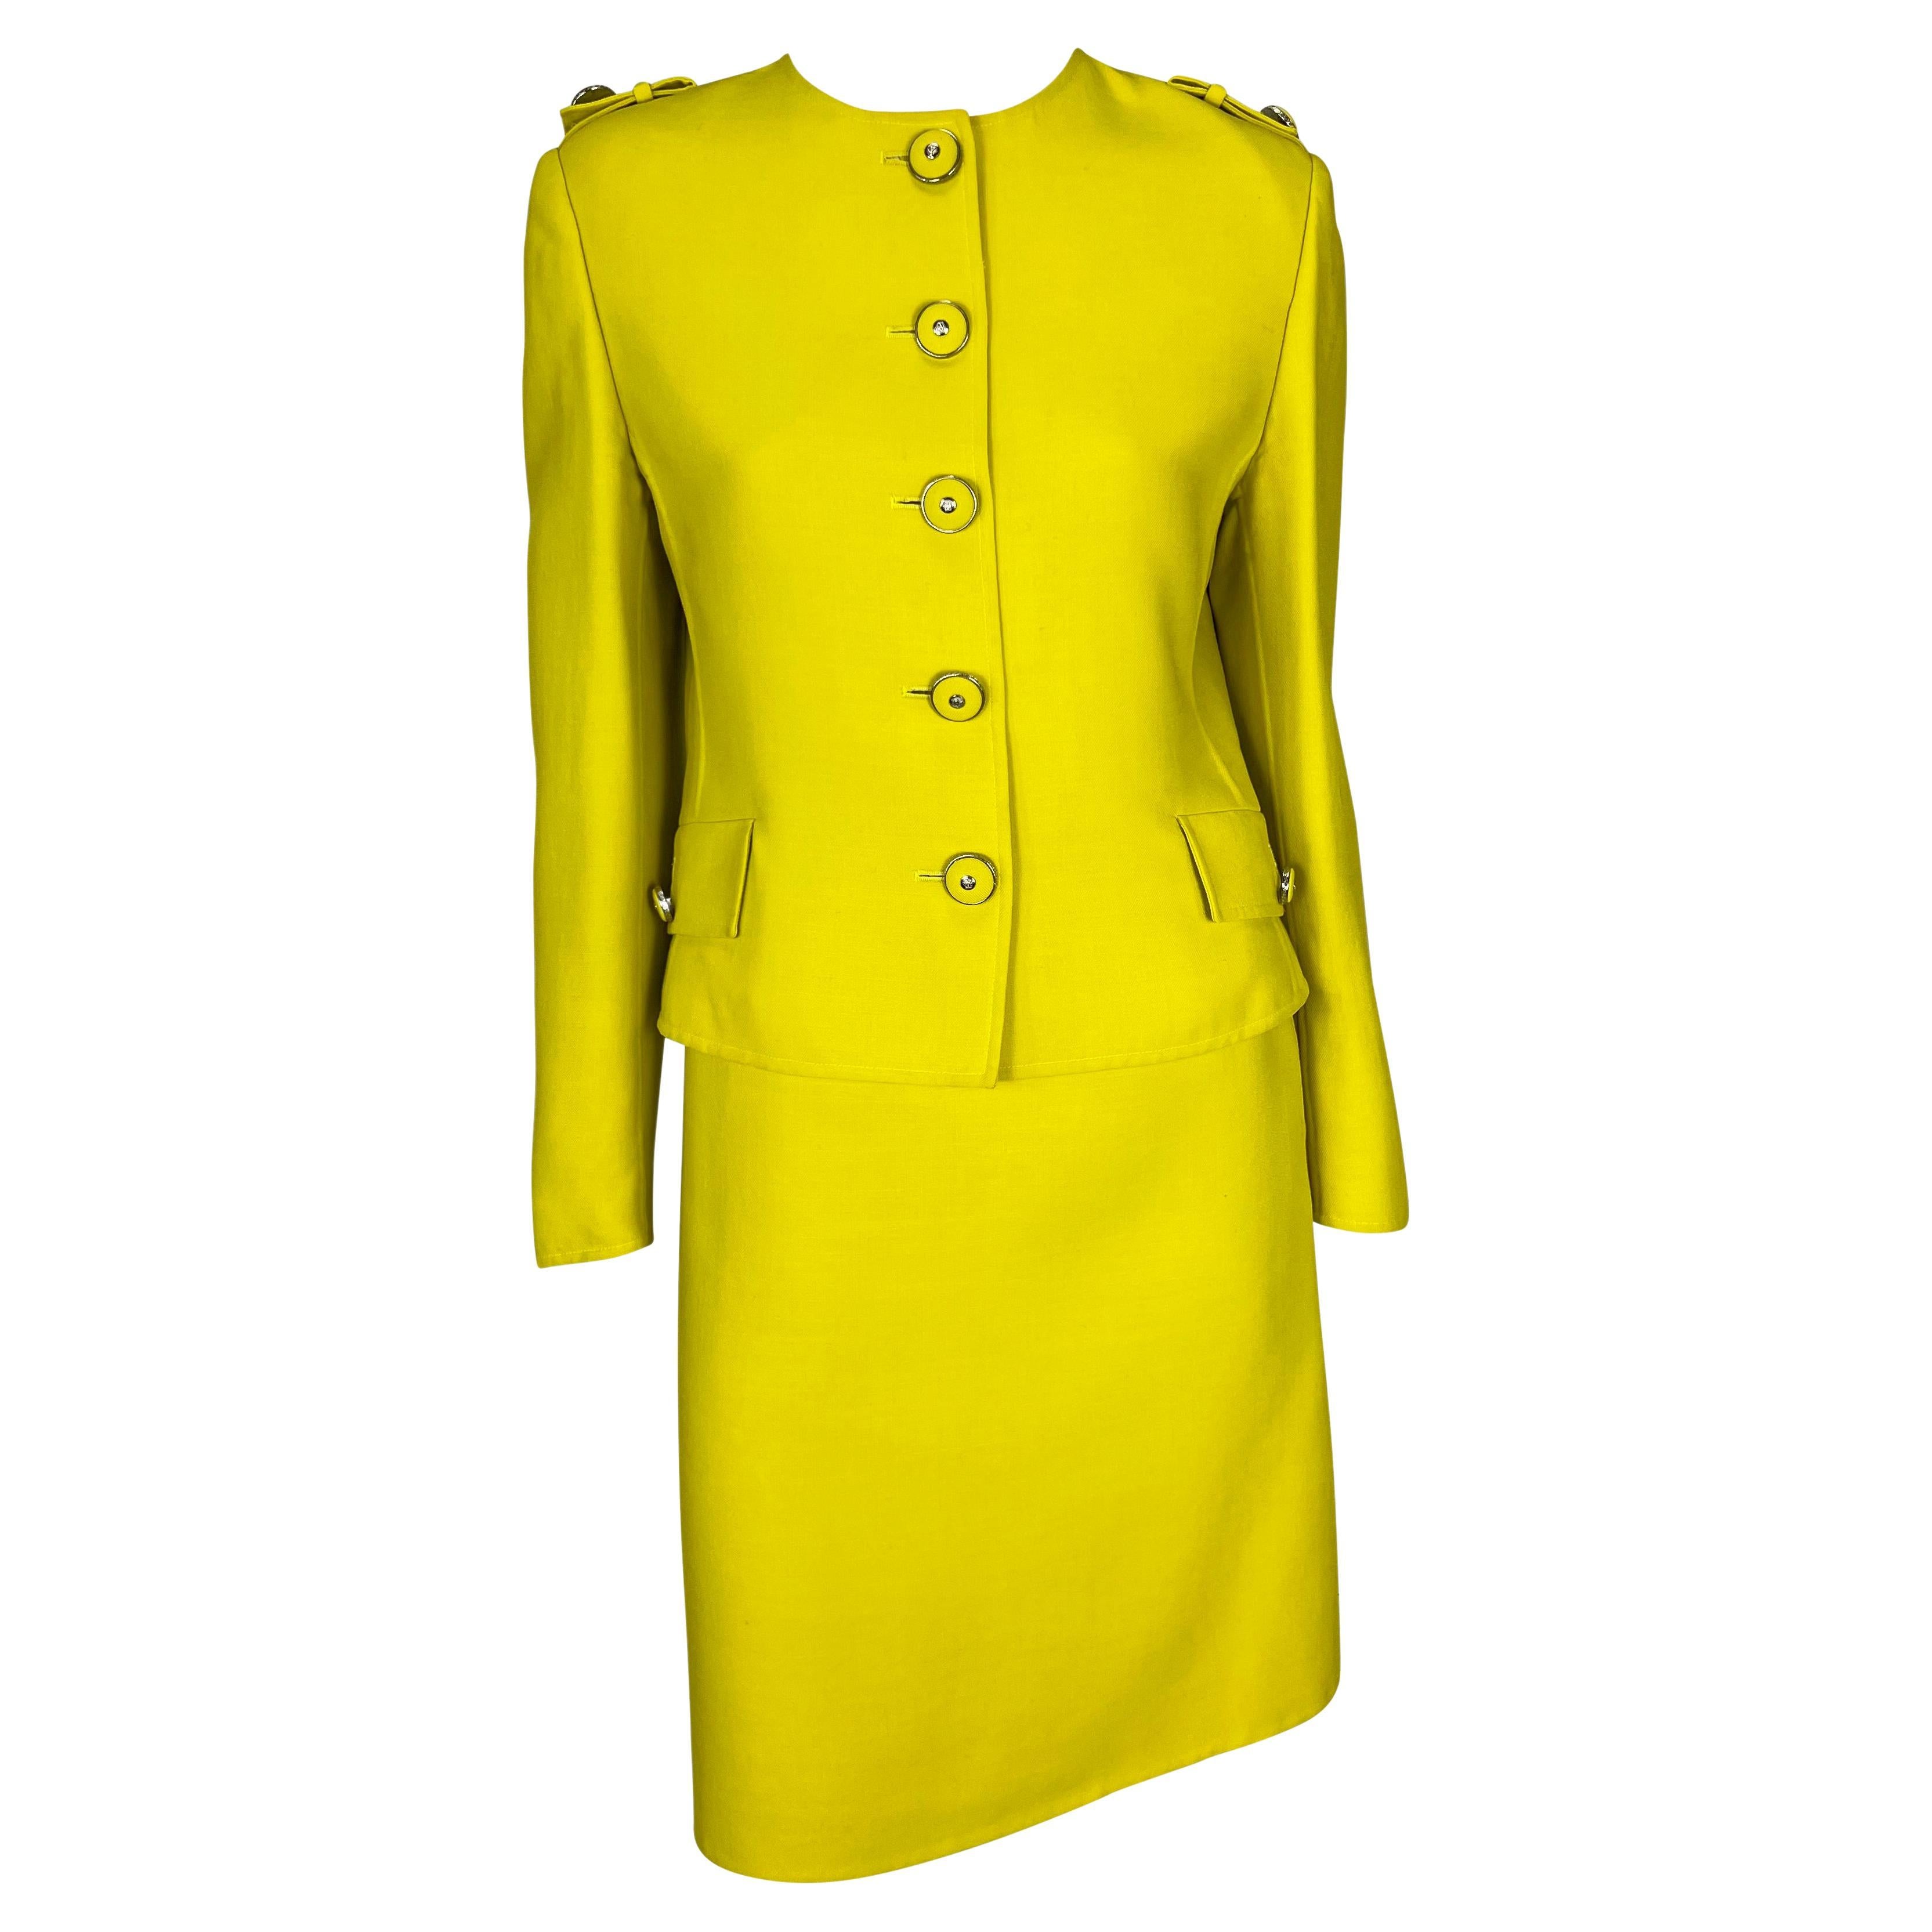 1996 Gianni Versace Couture Yellow Medusa Button Skirt Suit